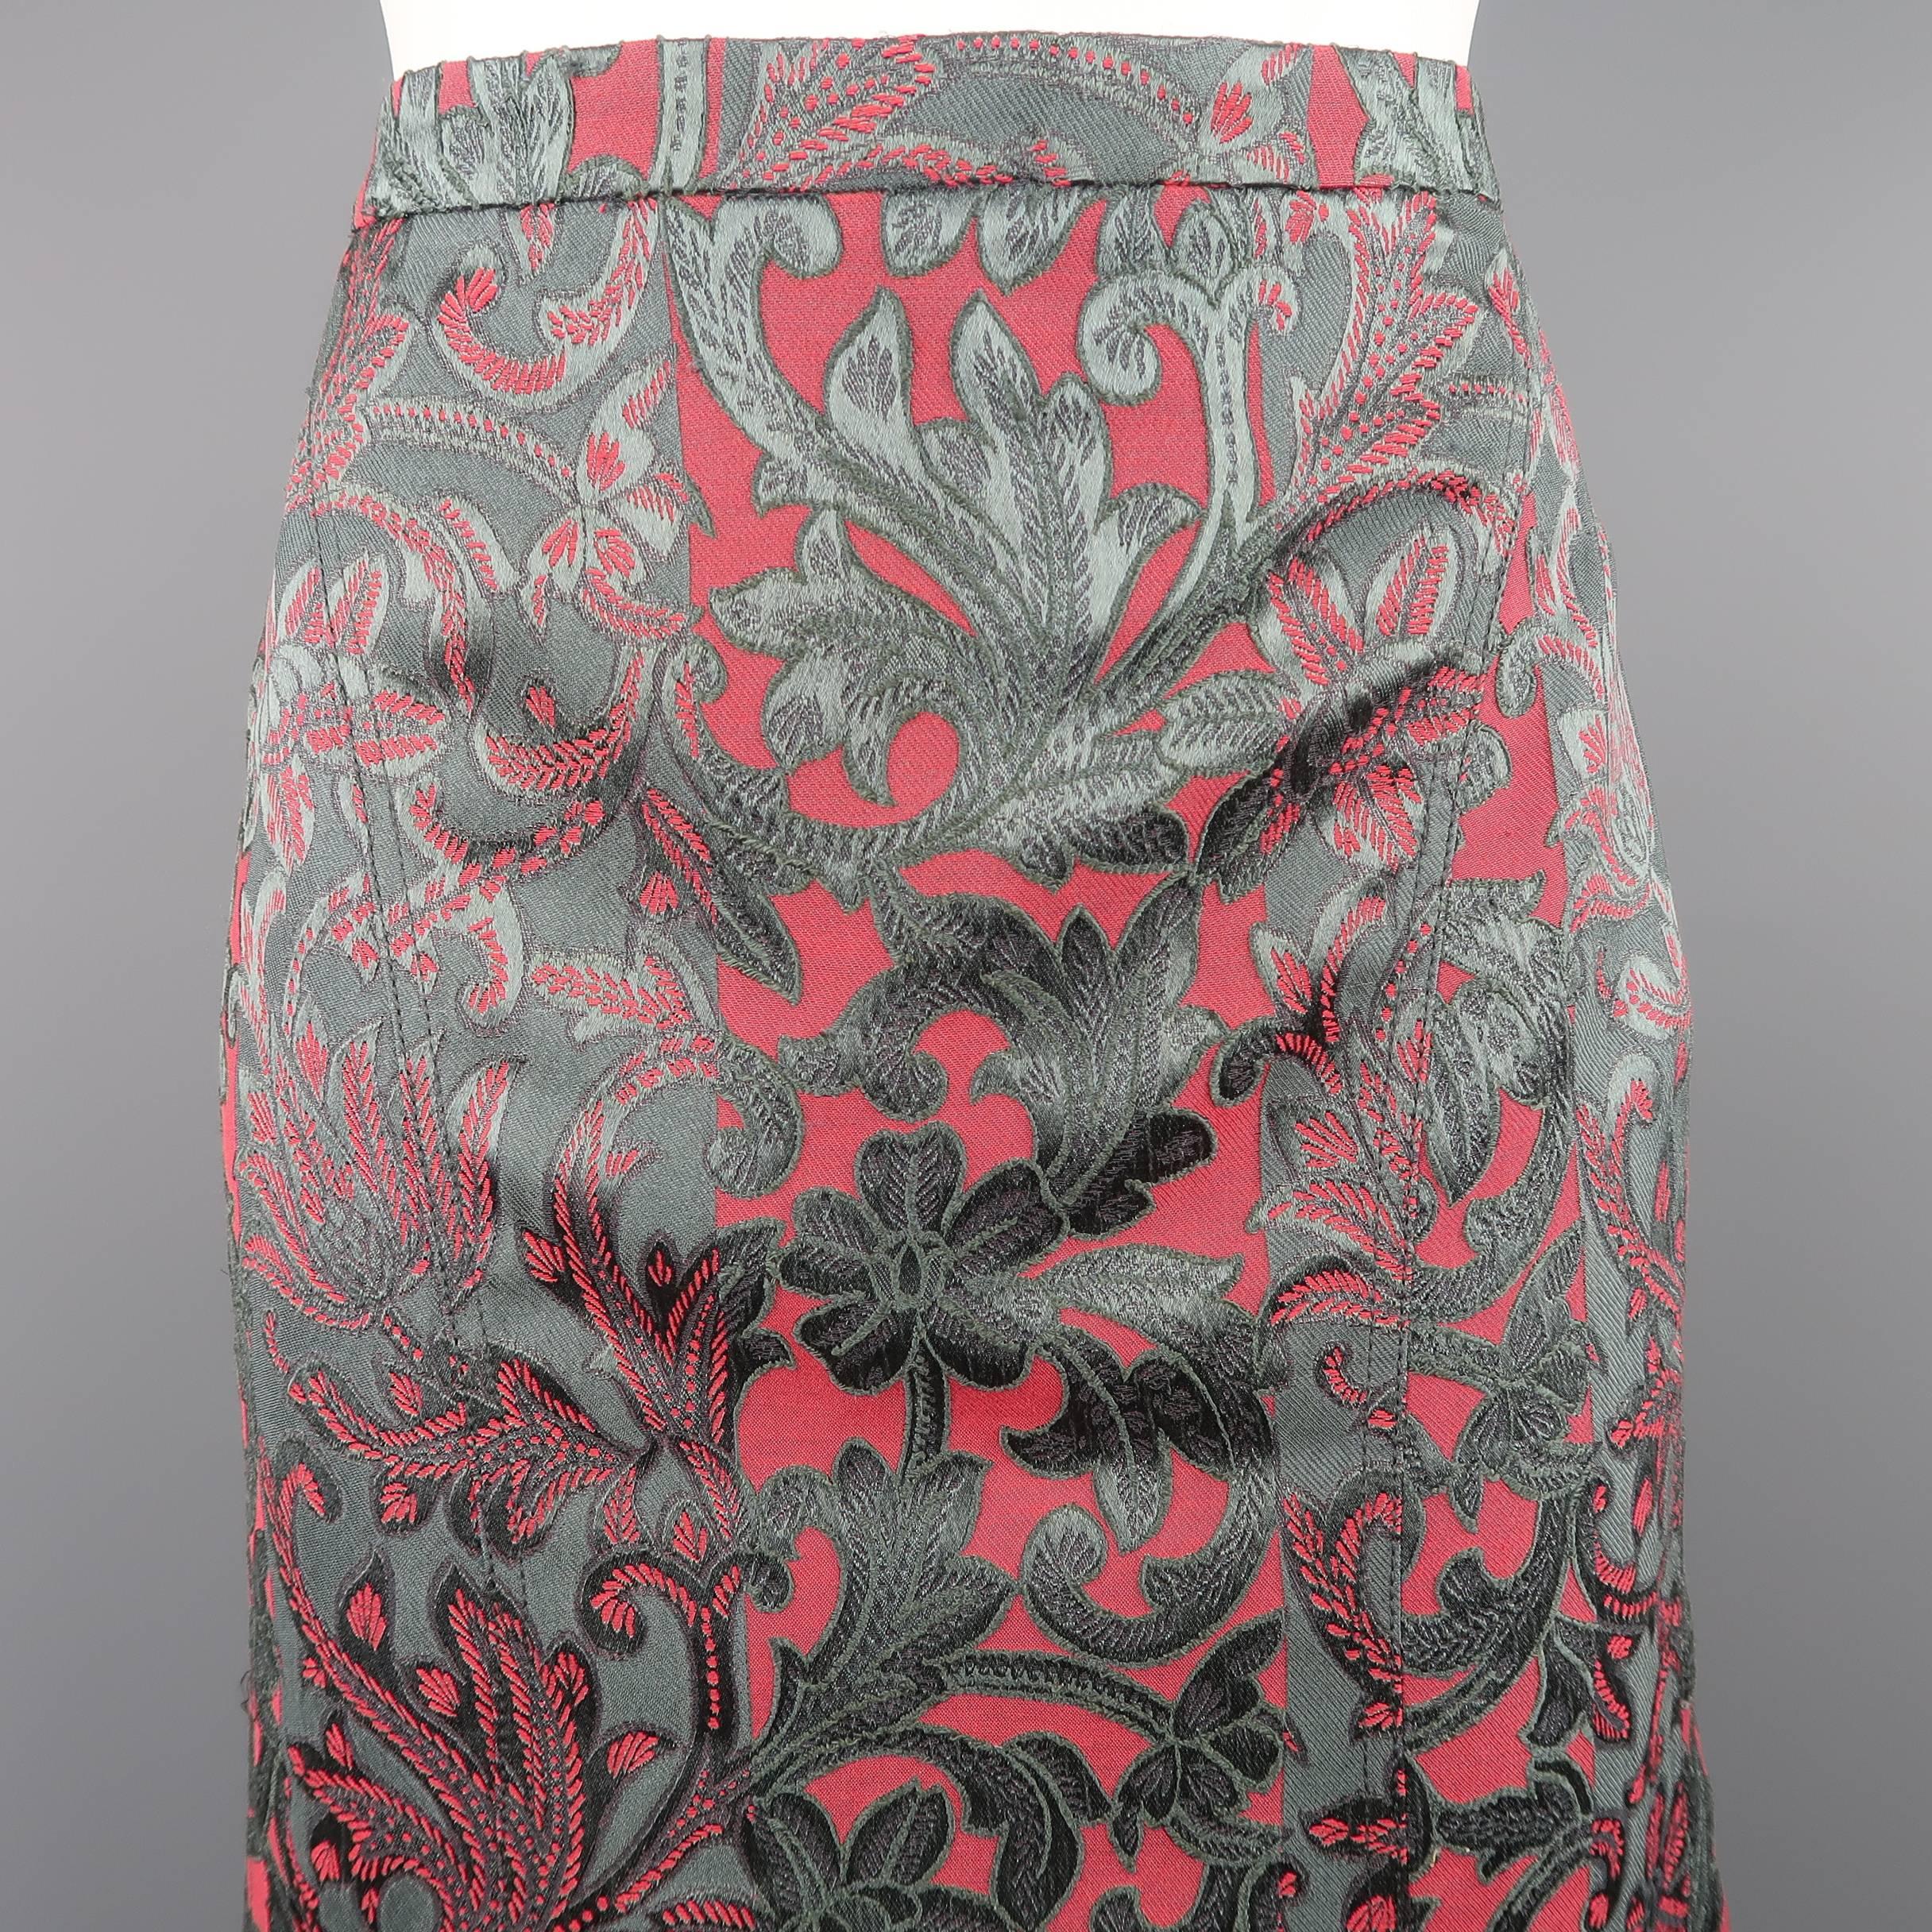 ETRO A line skirt comes in a muted burgundy and teal gray floral paisley jacquard with a fitted silhouette and ruffled fishtail back. Made in Italy.
 
Good Pre-Owned Condition.
Marked: IT 44 (Runs Small)
 
Measurements:
 
Waist: 31 in.
Hip: 38